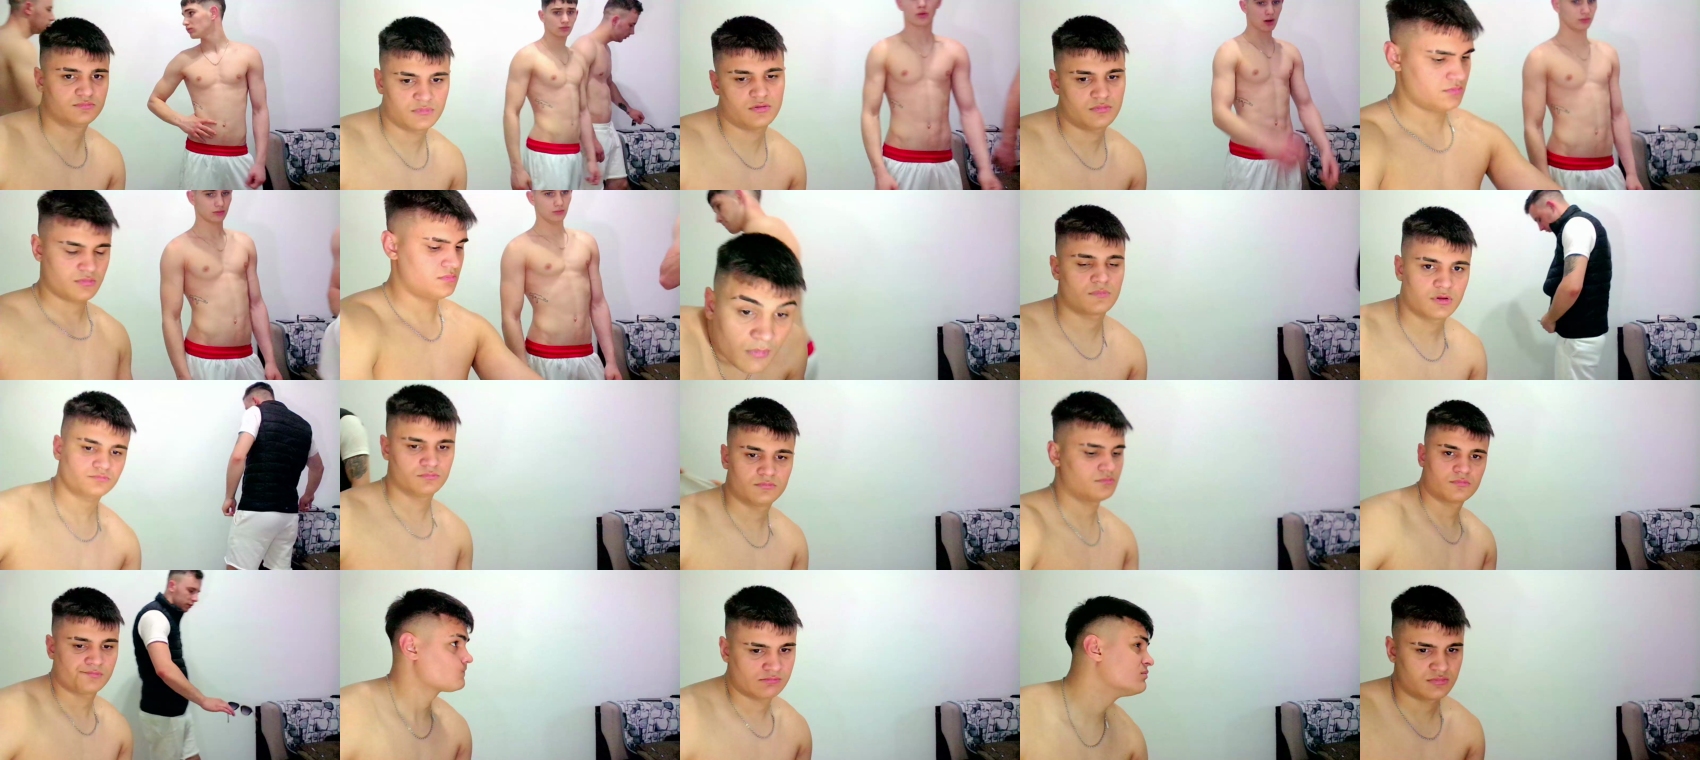 brityboyss1 Chaturbate 02-05-2022 video Naked